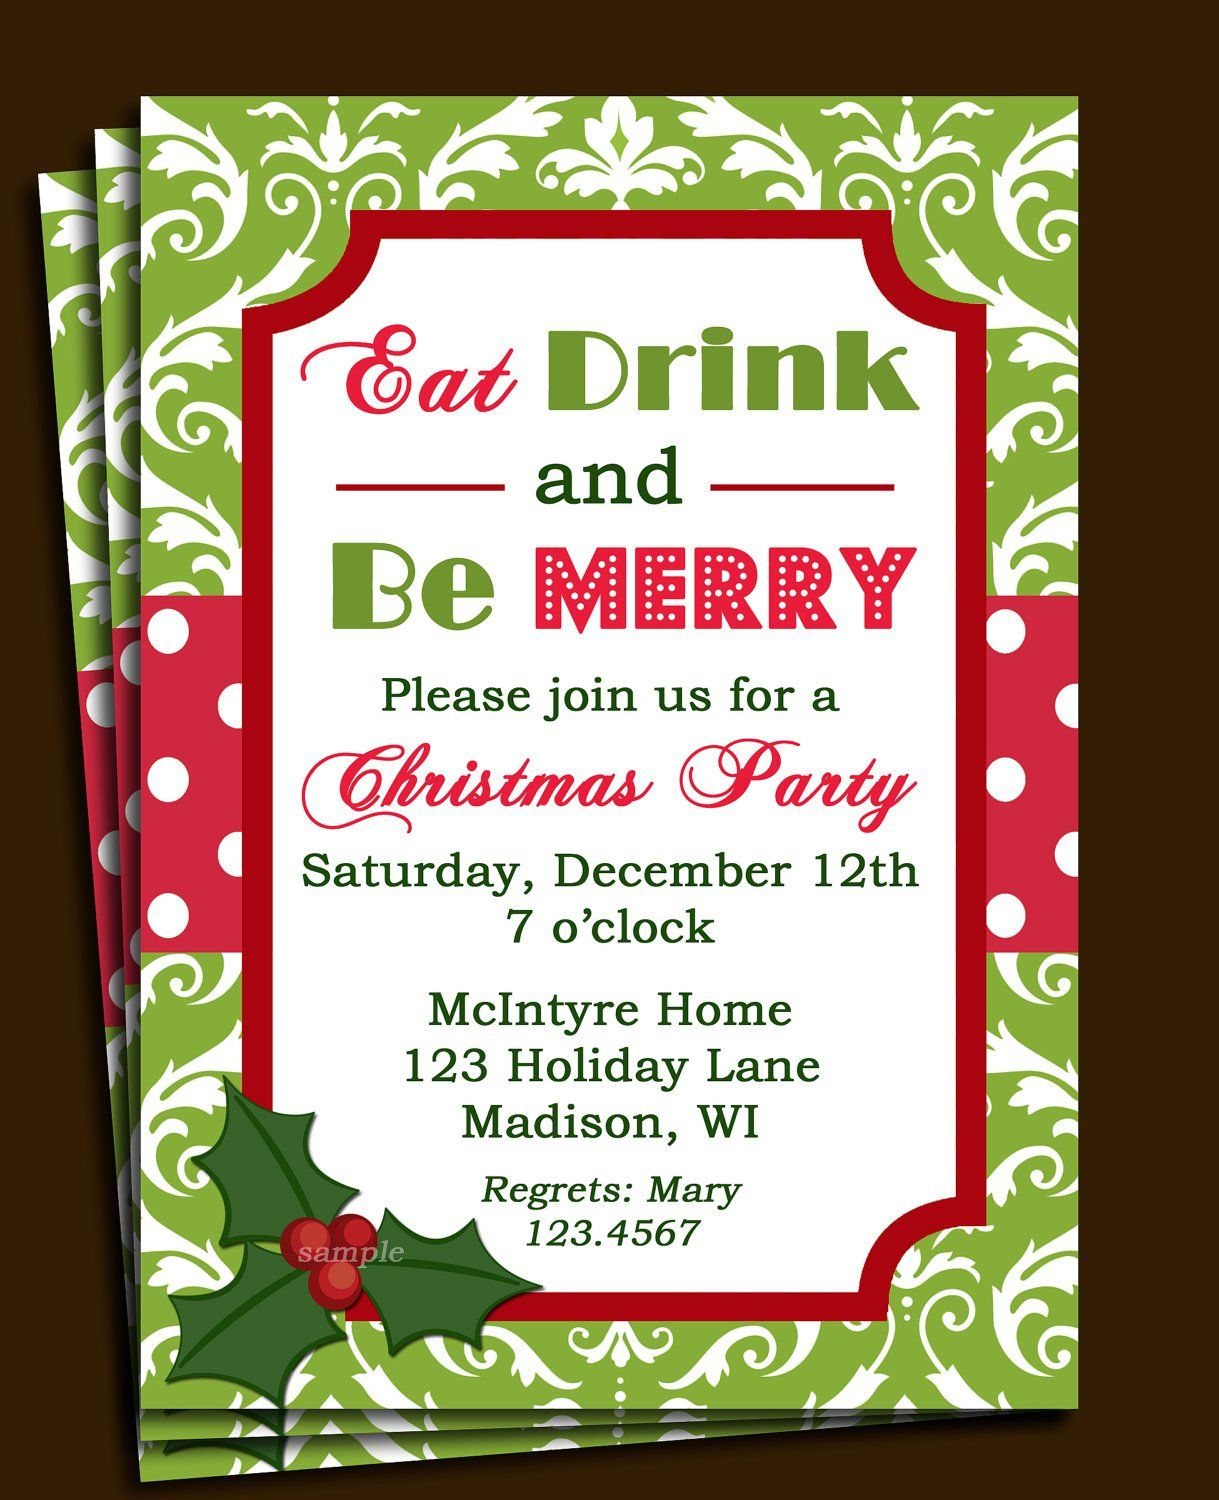 Invitation Letter Sample With Rsvp Party Invitations Holiday for dimensions 1219 X 1500